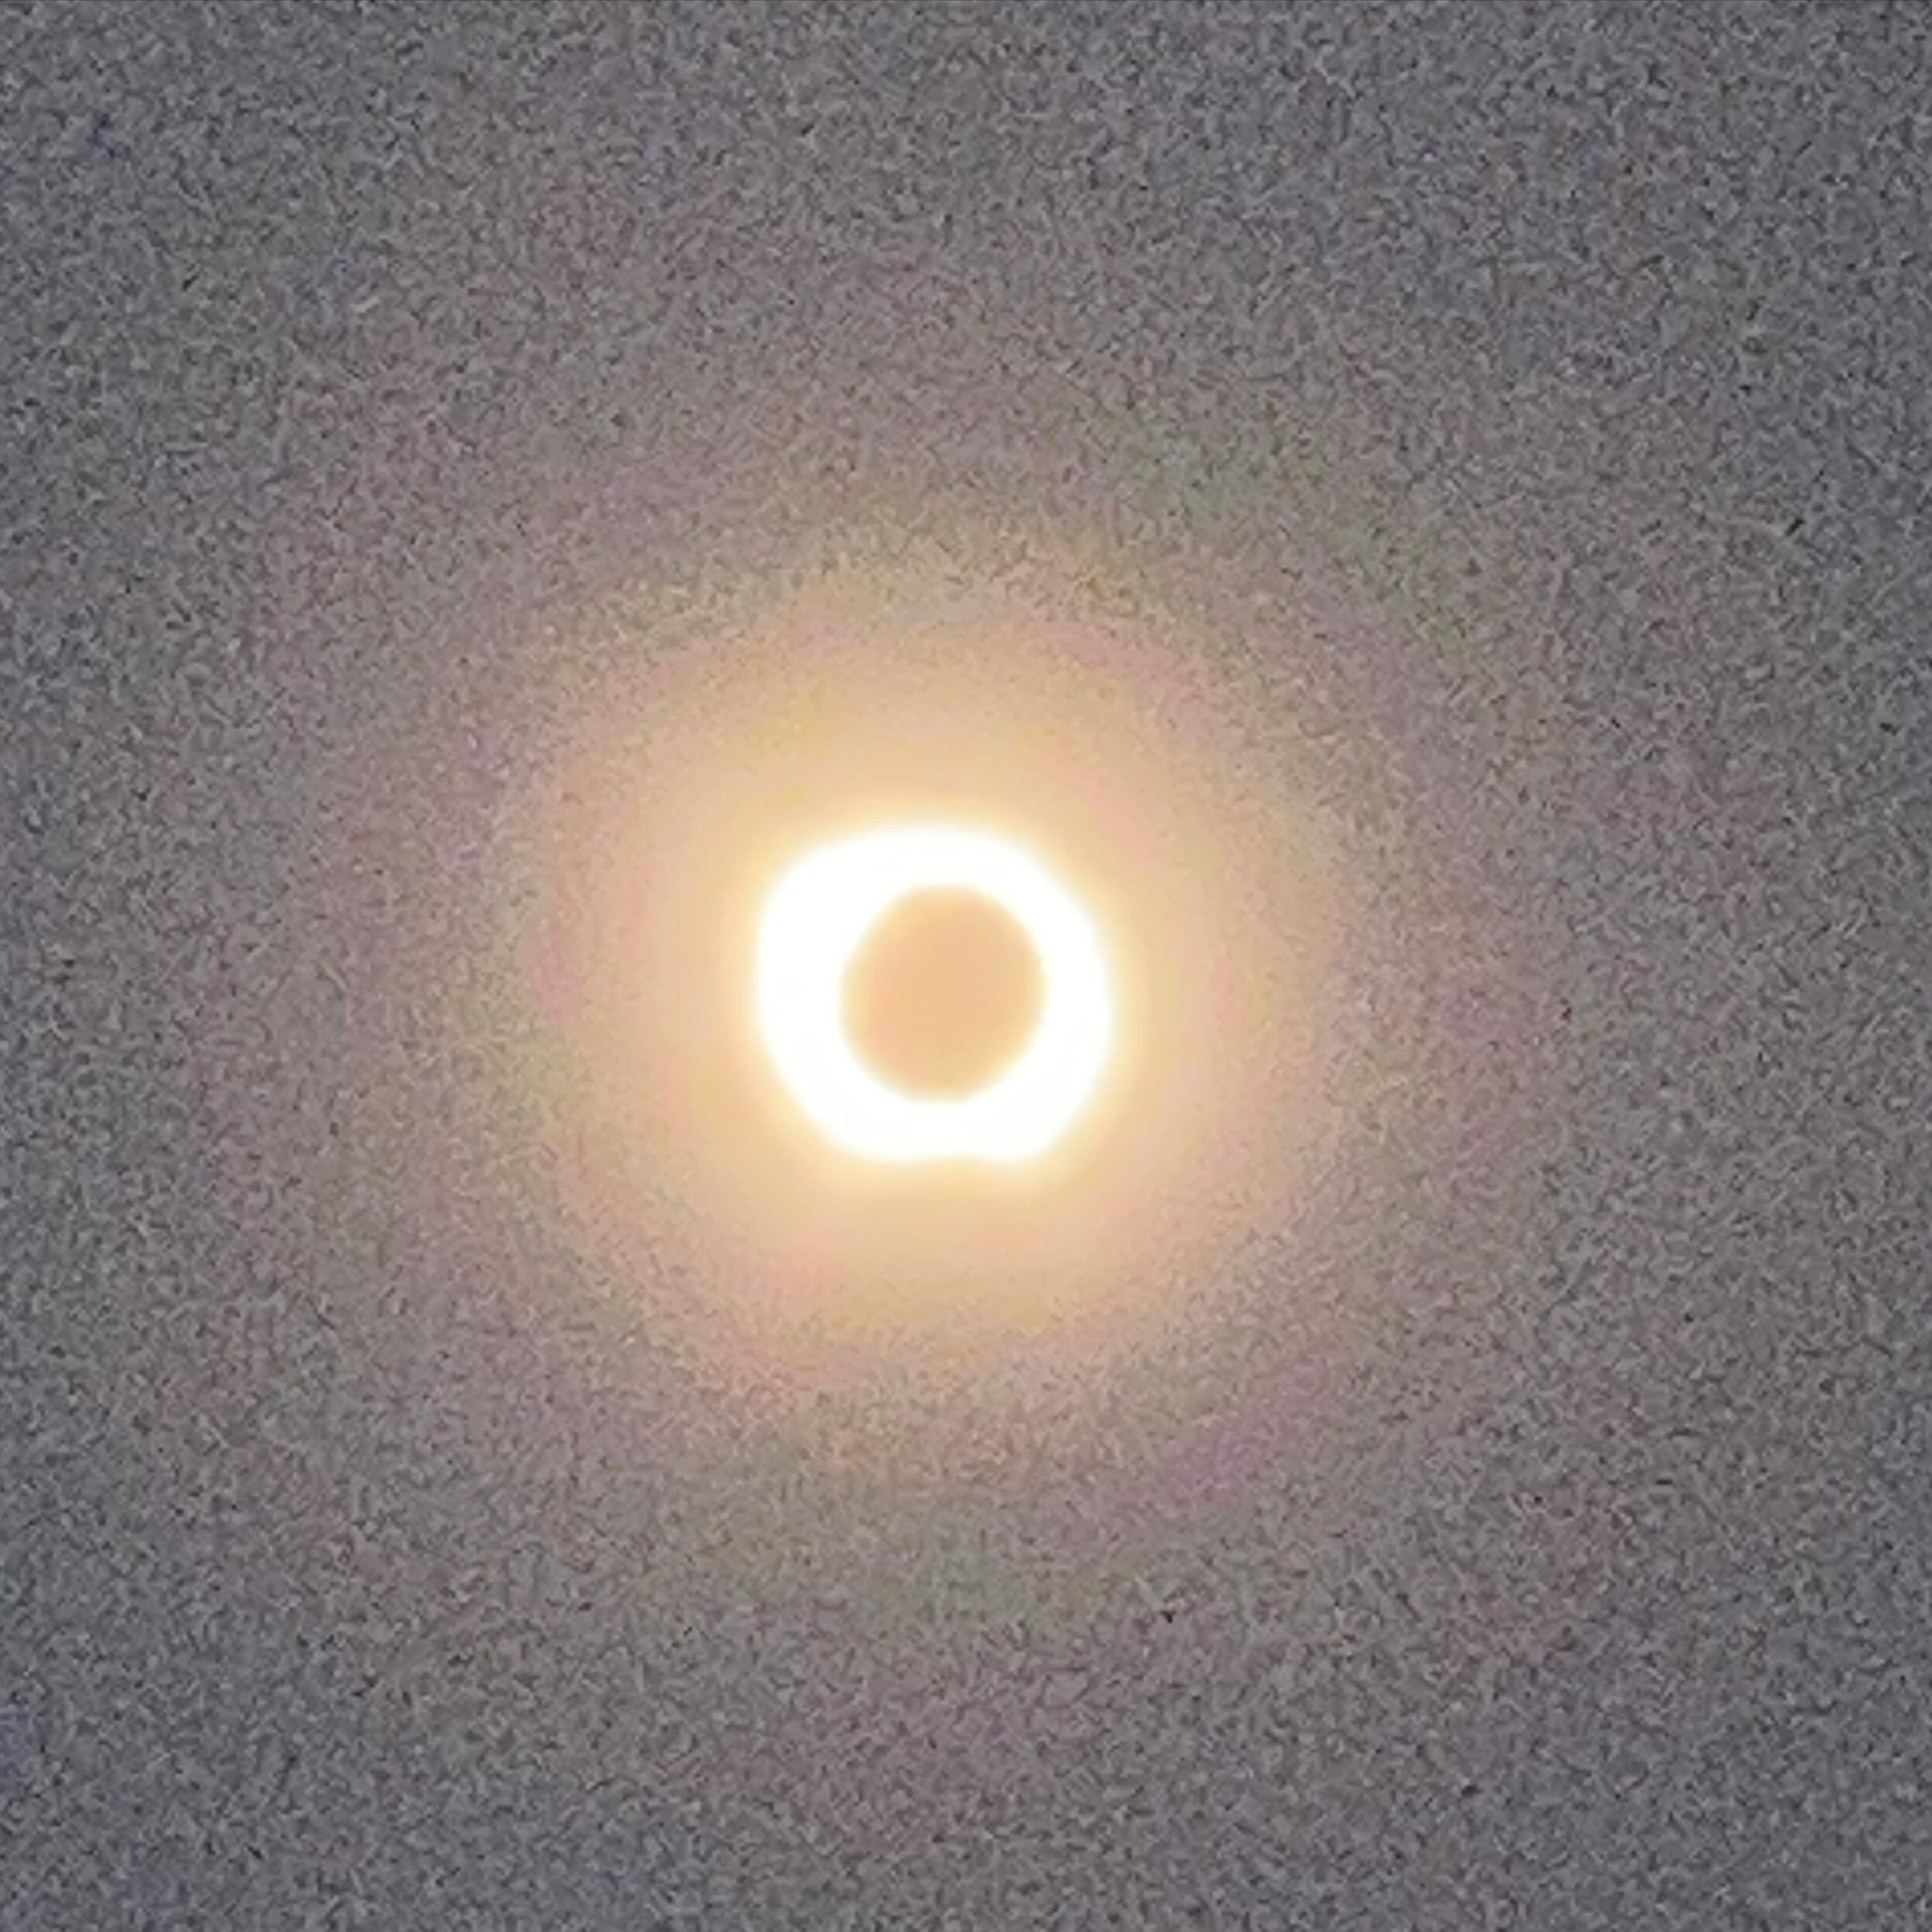 Total Eclipse from our backyard. Incredible.